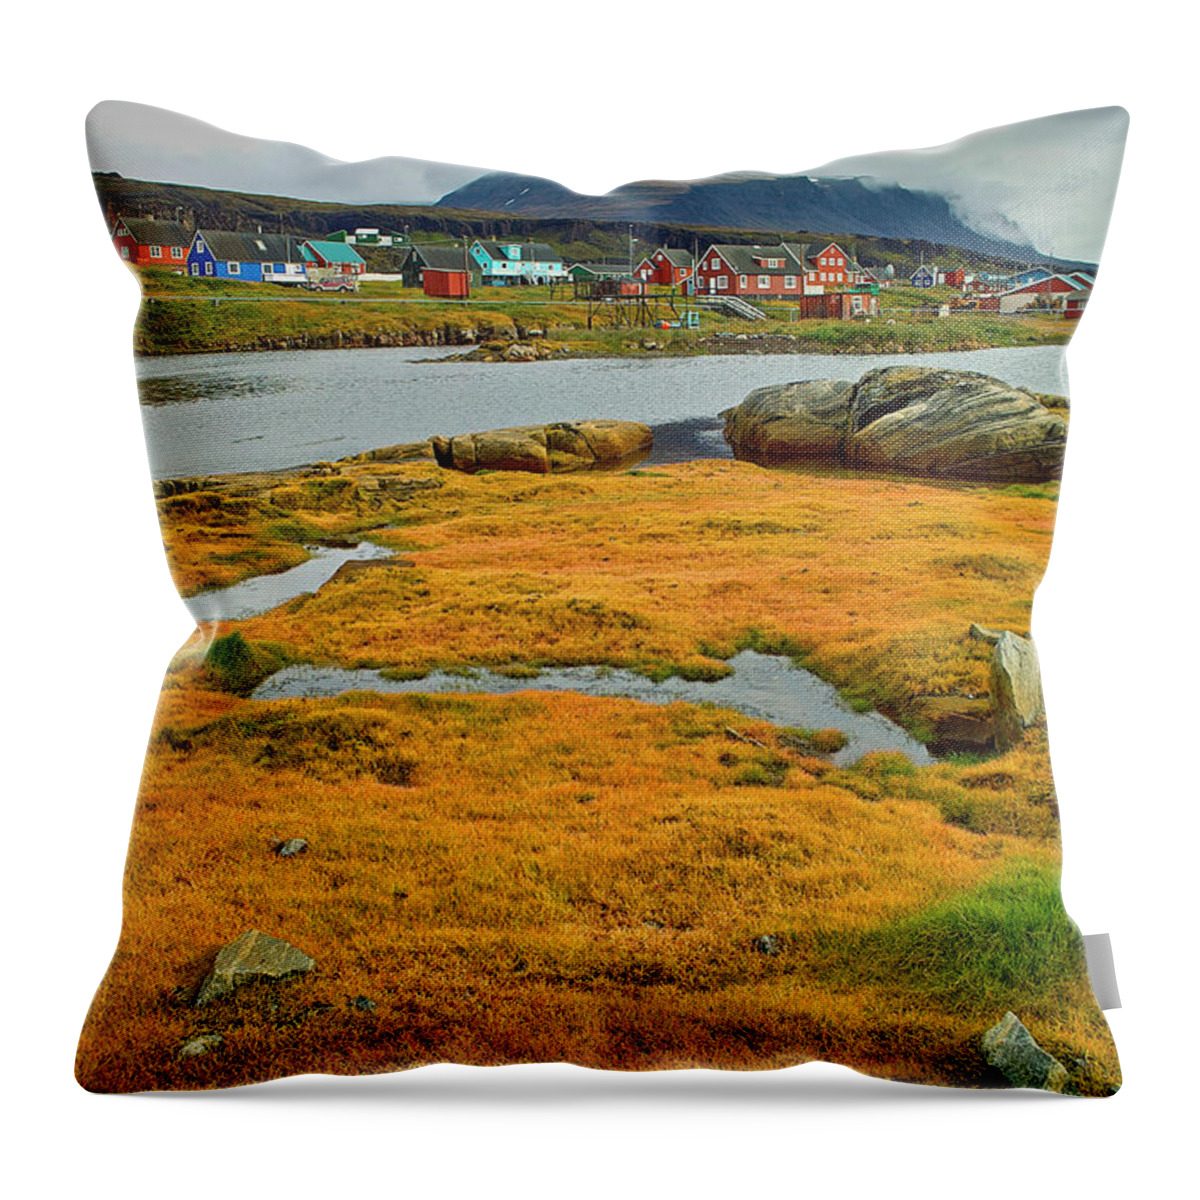 Tranquility Throw Pillow featuring the photograph Greenland by Thomas-vietz